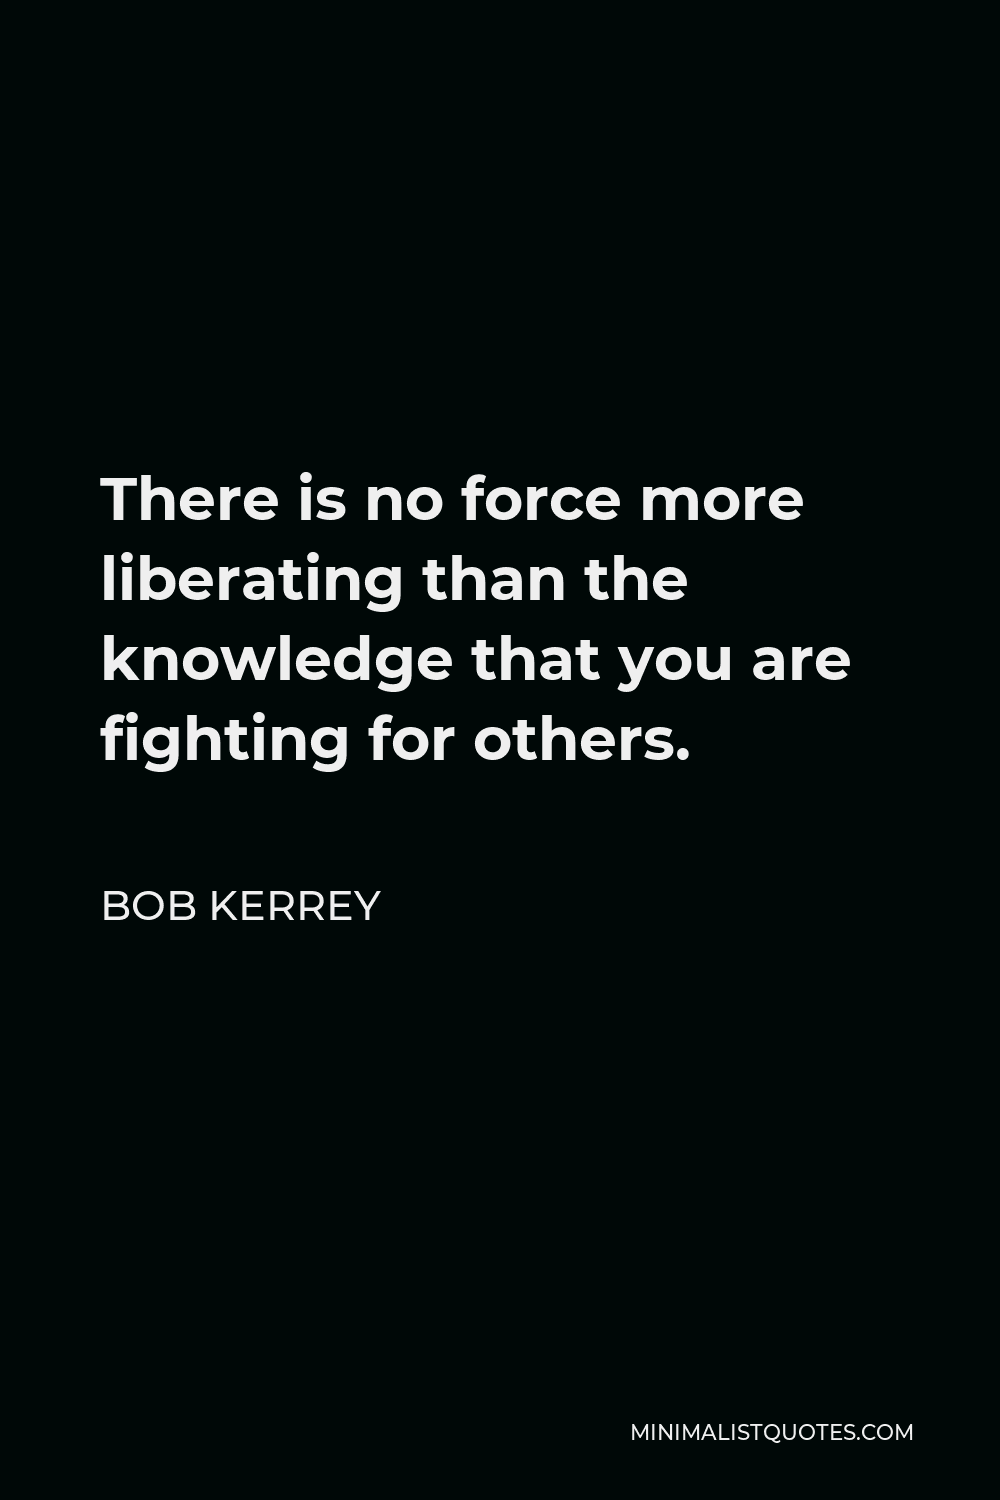 Bob Kerrey Quote - There is no force more liberating than the knowledge that you are fighting for others.